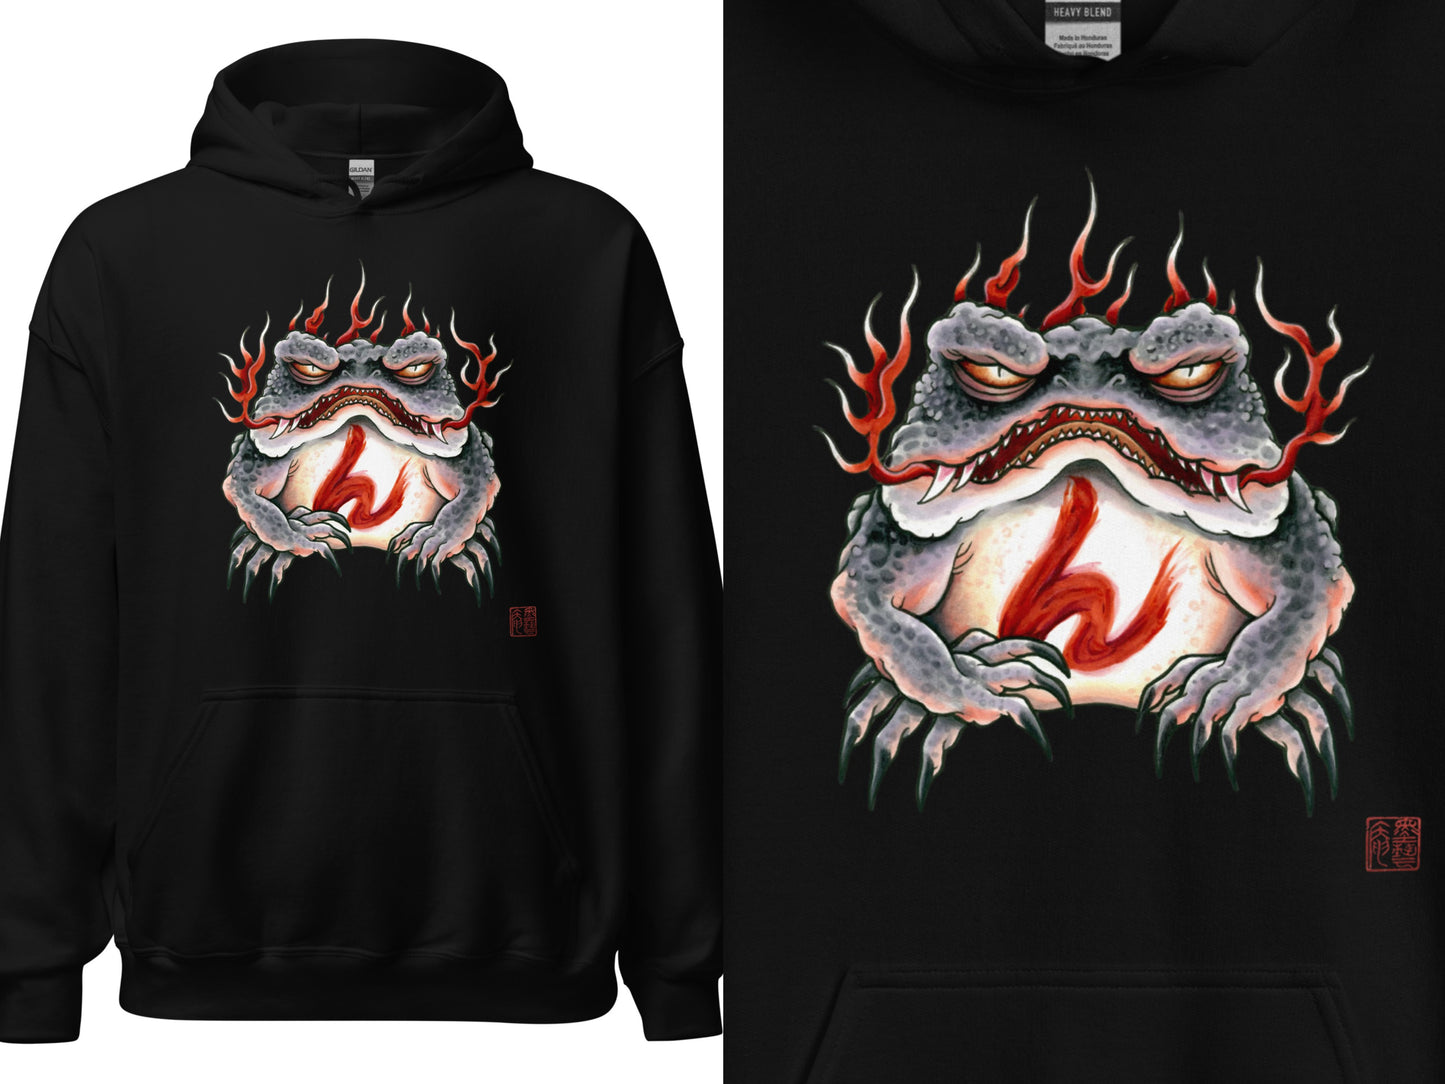 “Fight till you die” - Gaman Toad Unisex Hoodie (front)